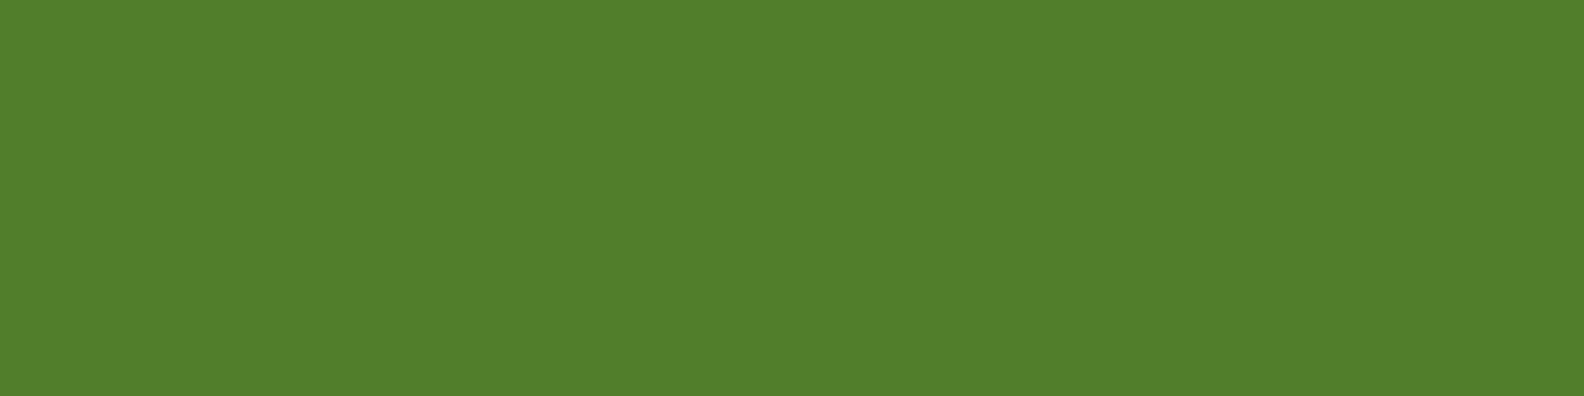 1584x396 Sap Green Solid Color Background